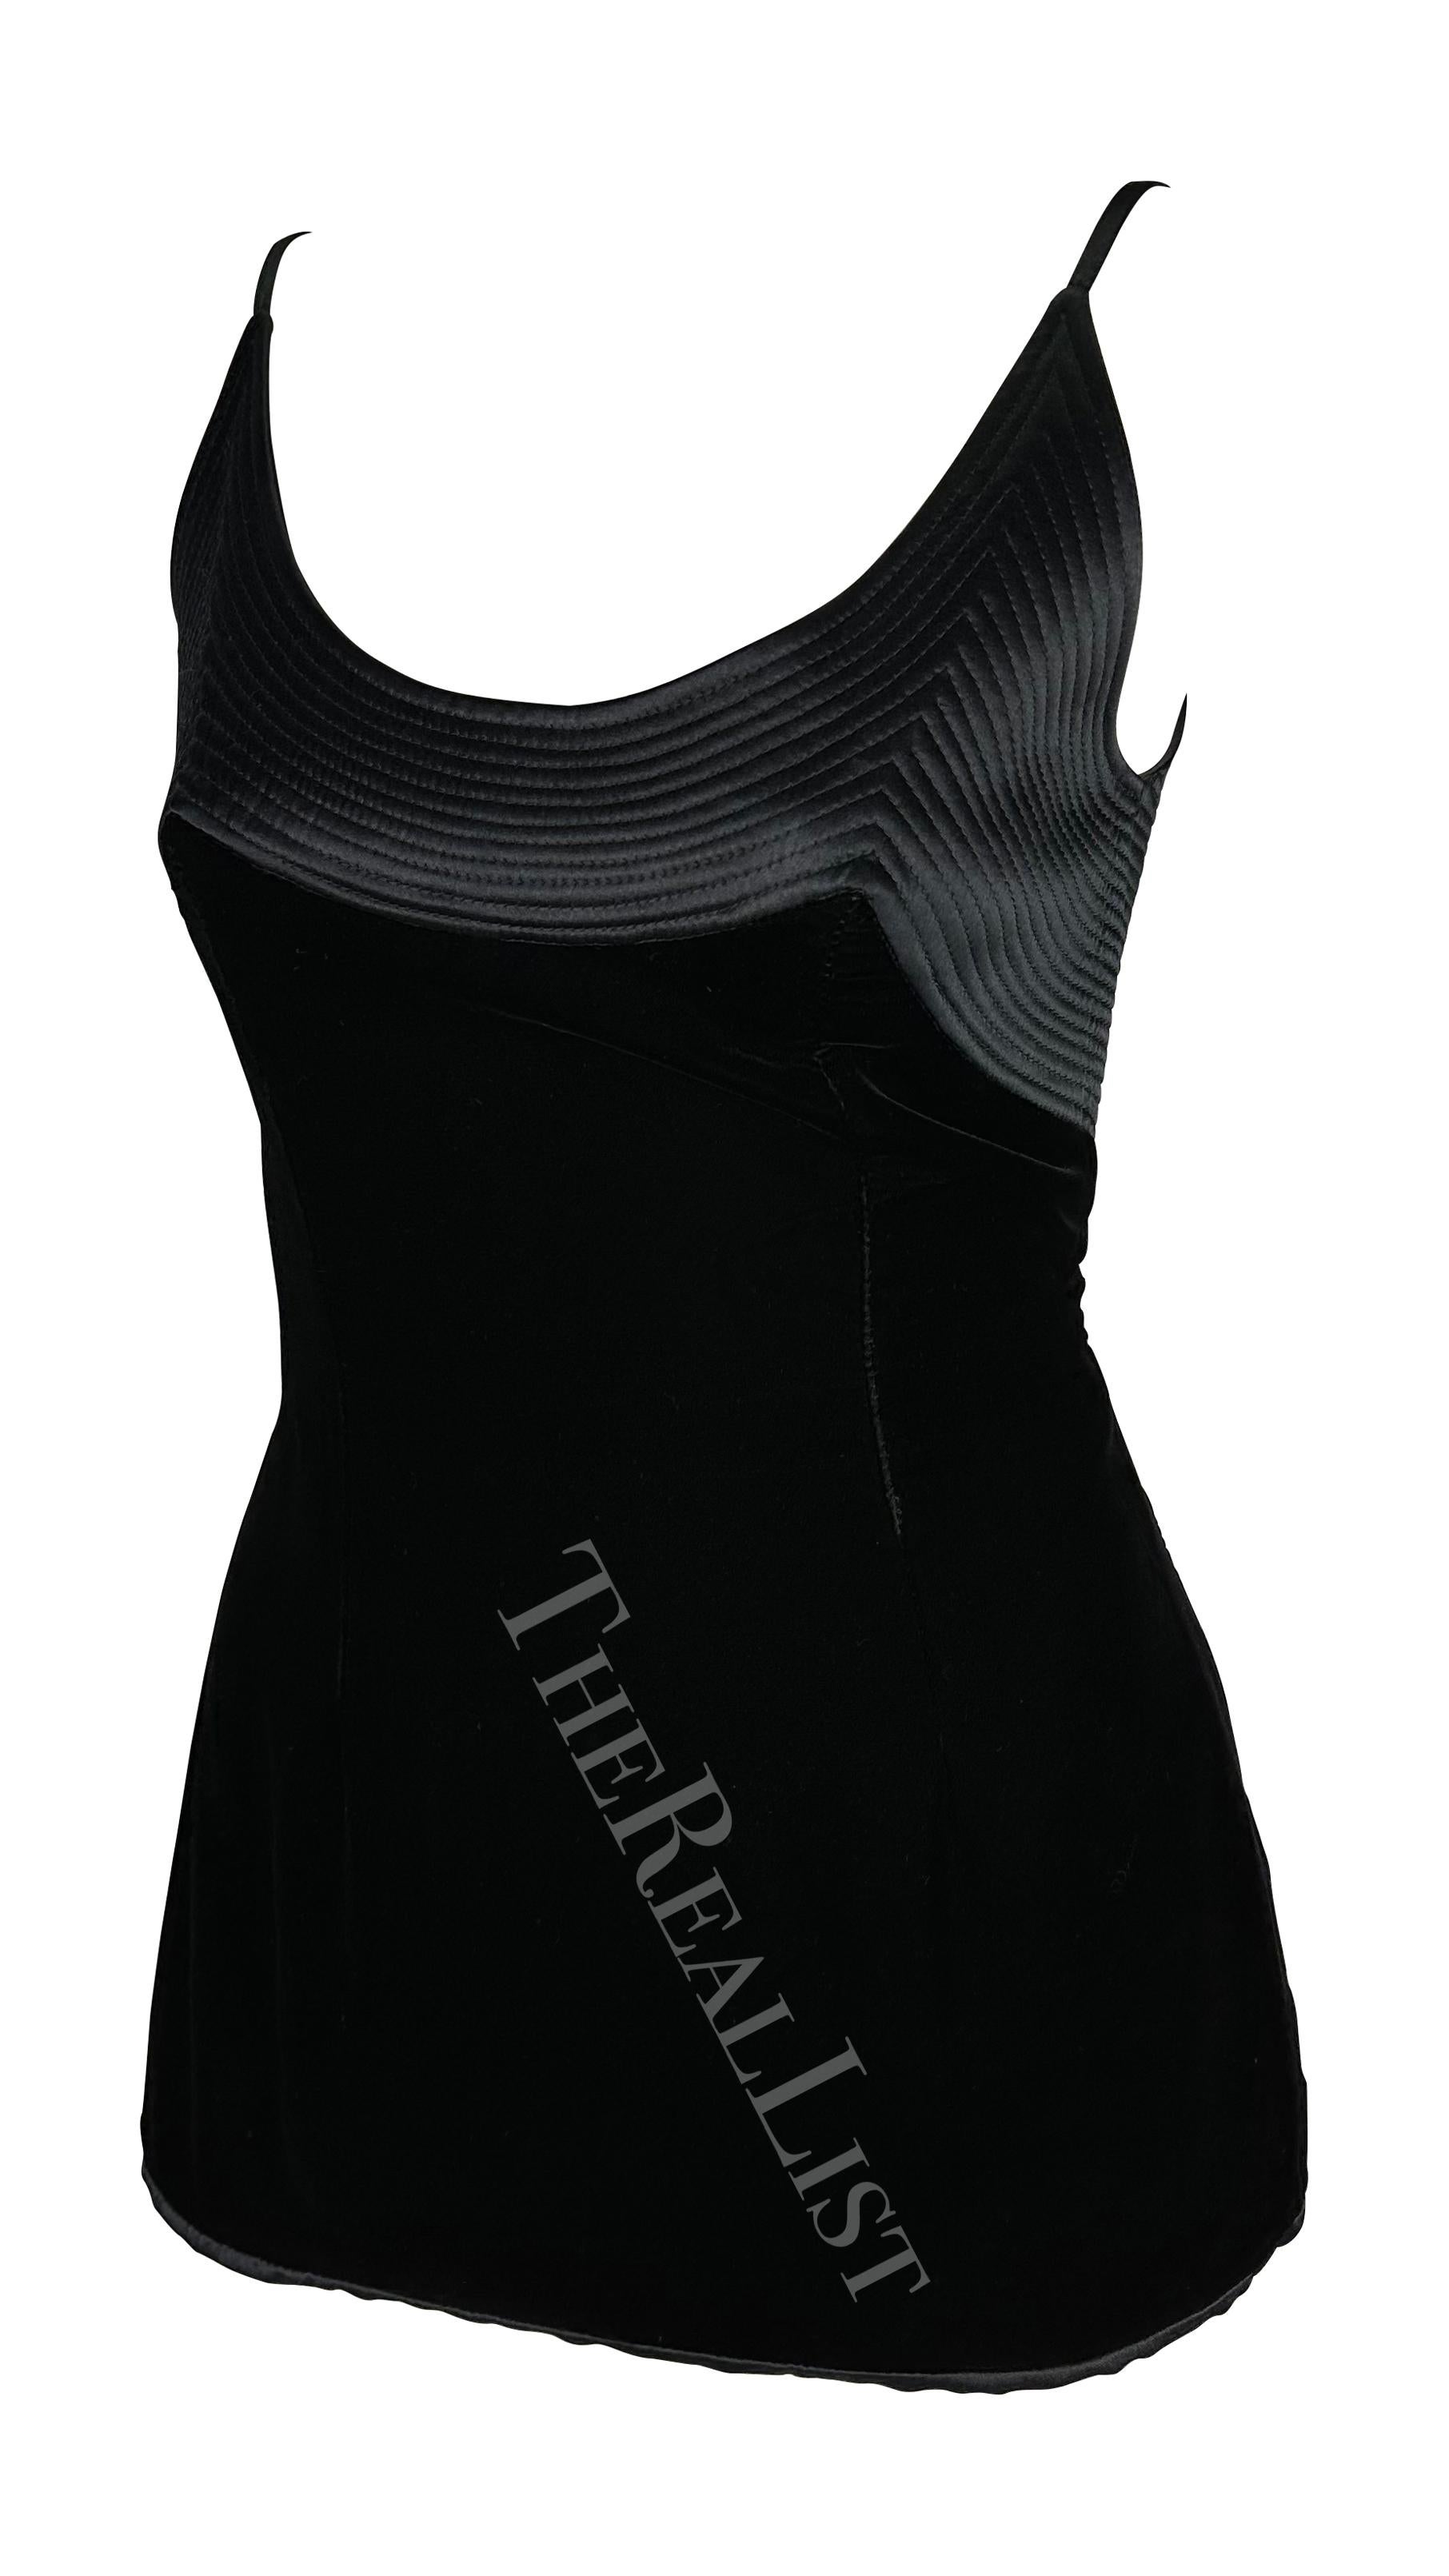 Presenting a black velvet Valentino tank top. From the 1990s, this top features a wide scoop neckline, velvet body, and quilted satin detail at the bust. The top is made complete with a zipper closure at the semi-exposed back. 

Approximate